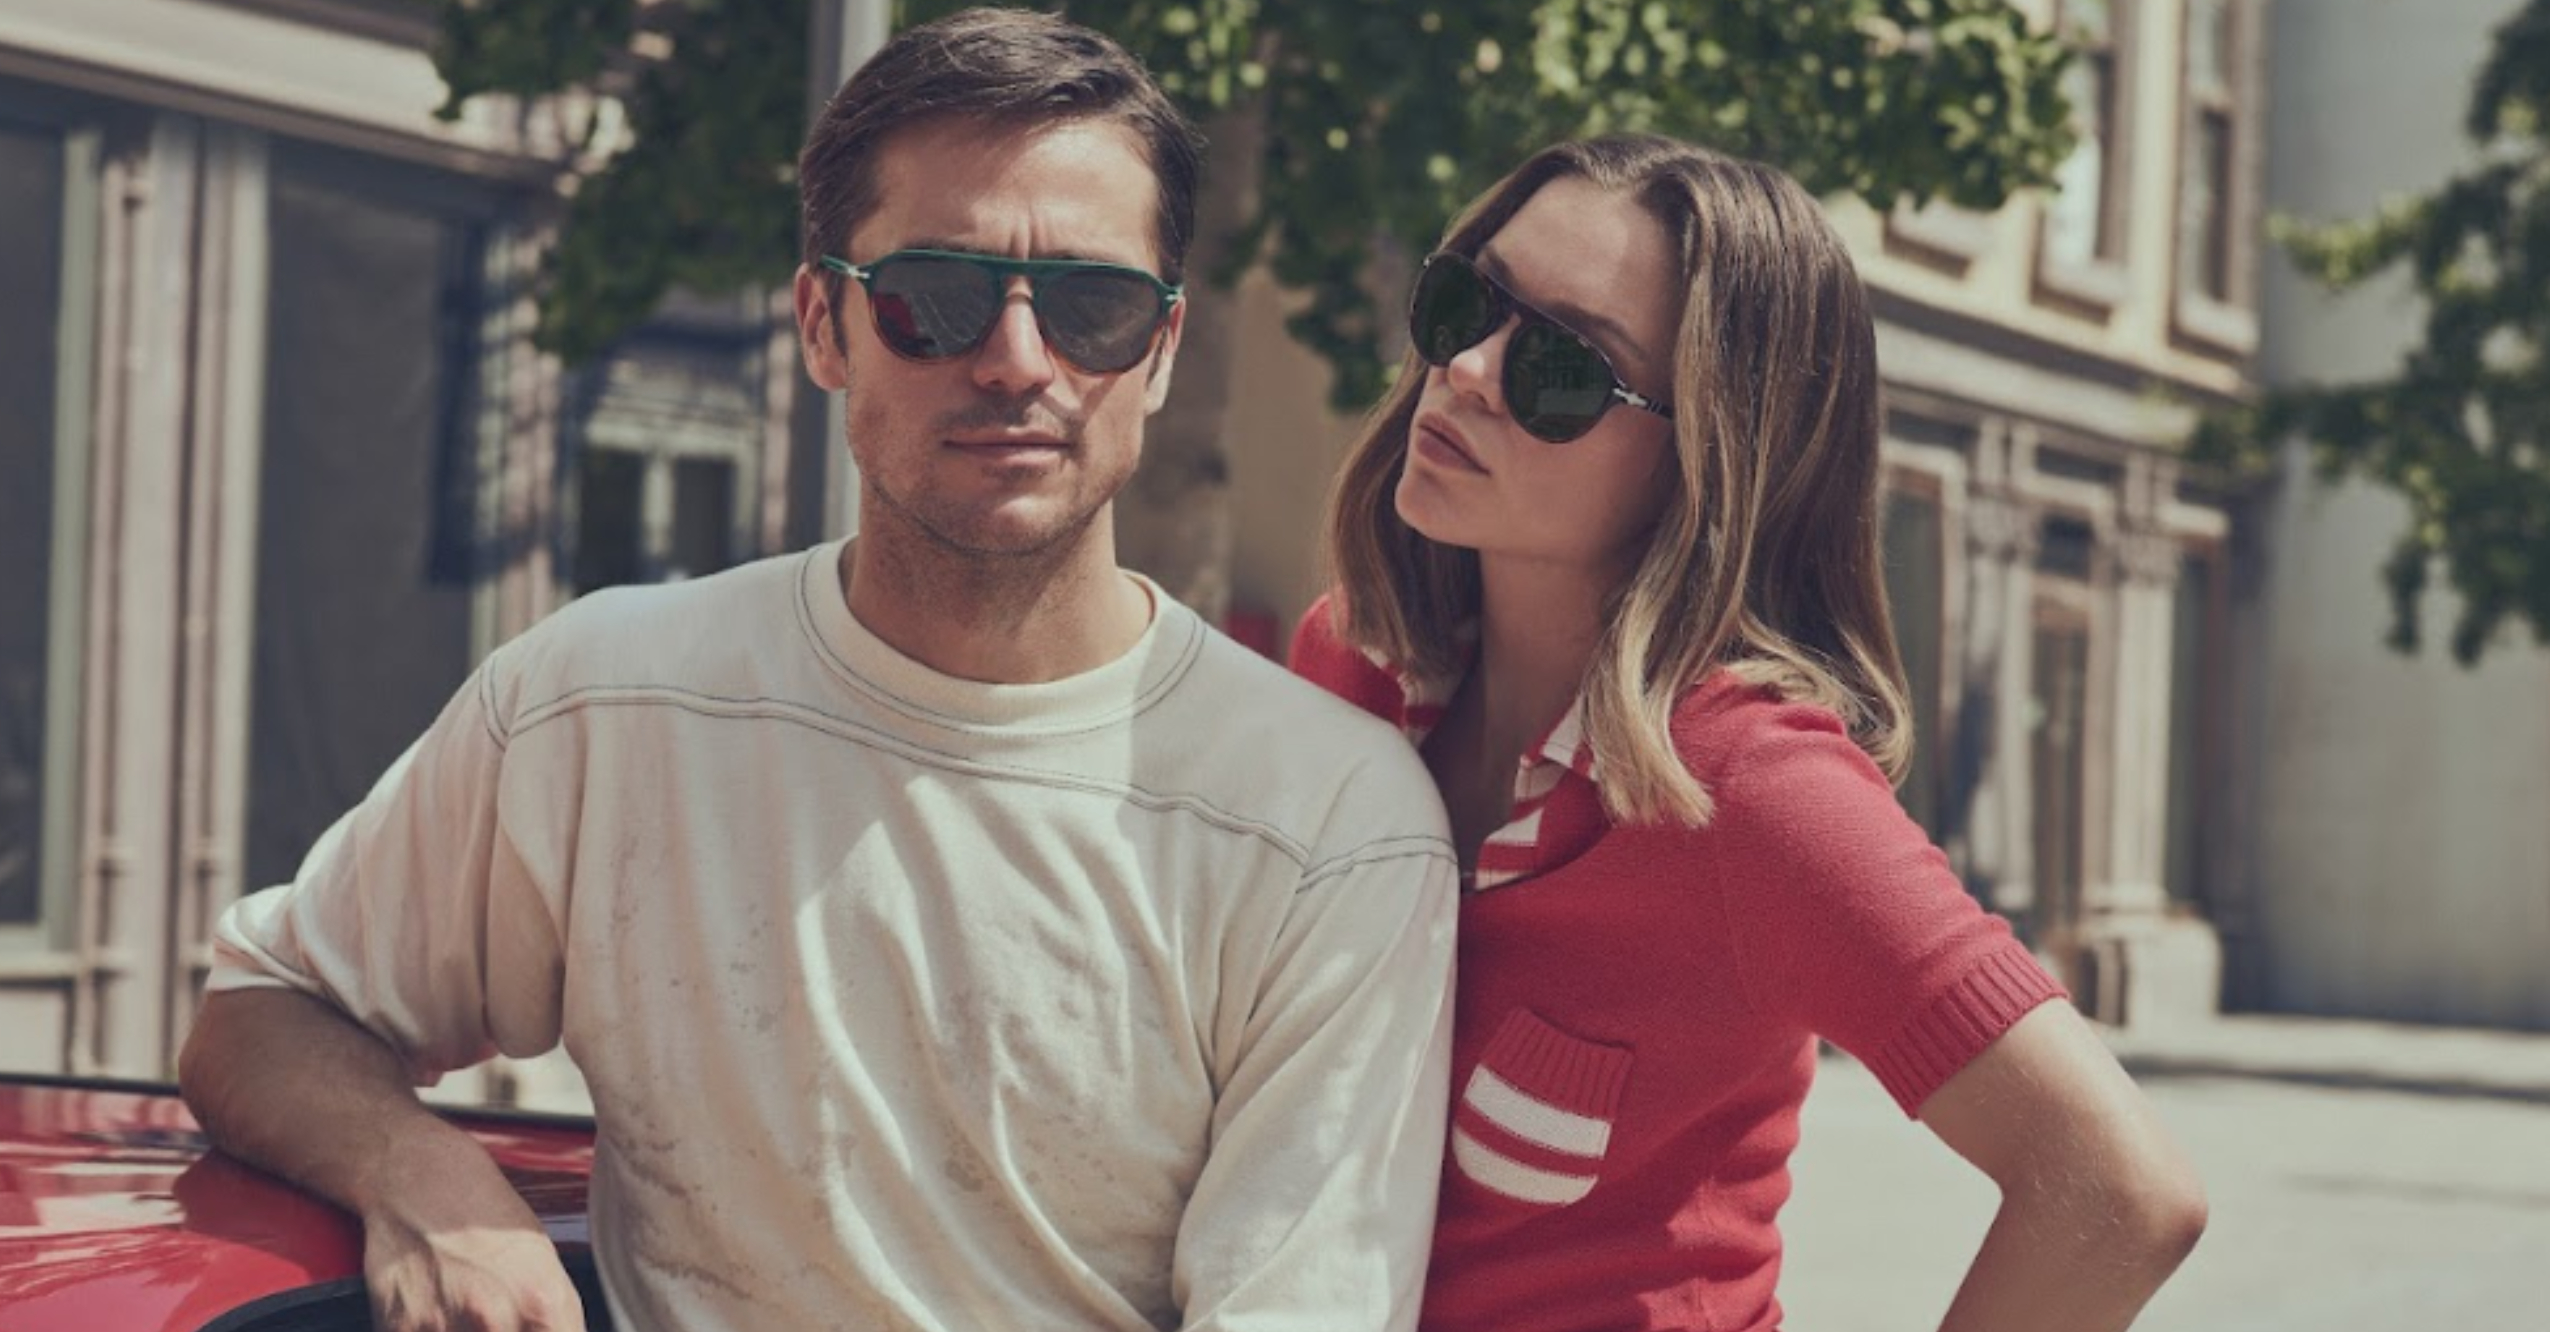 These Persol Sunglasses Will Make a Movie Star Out of You Yet